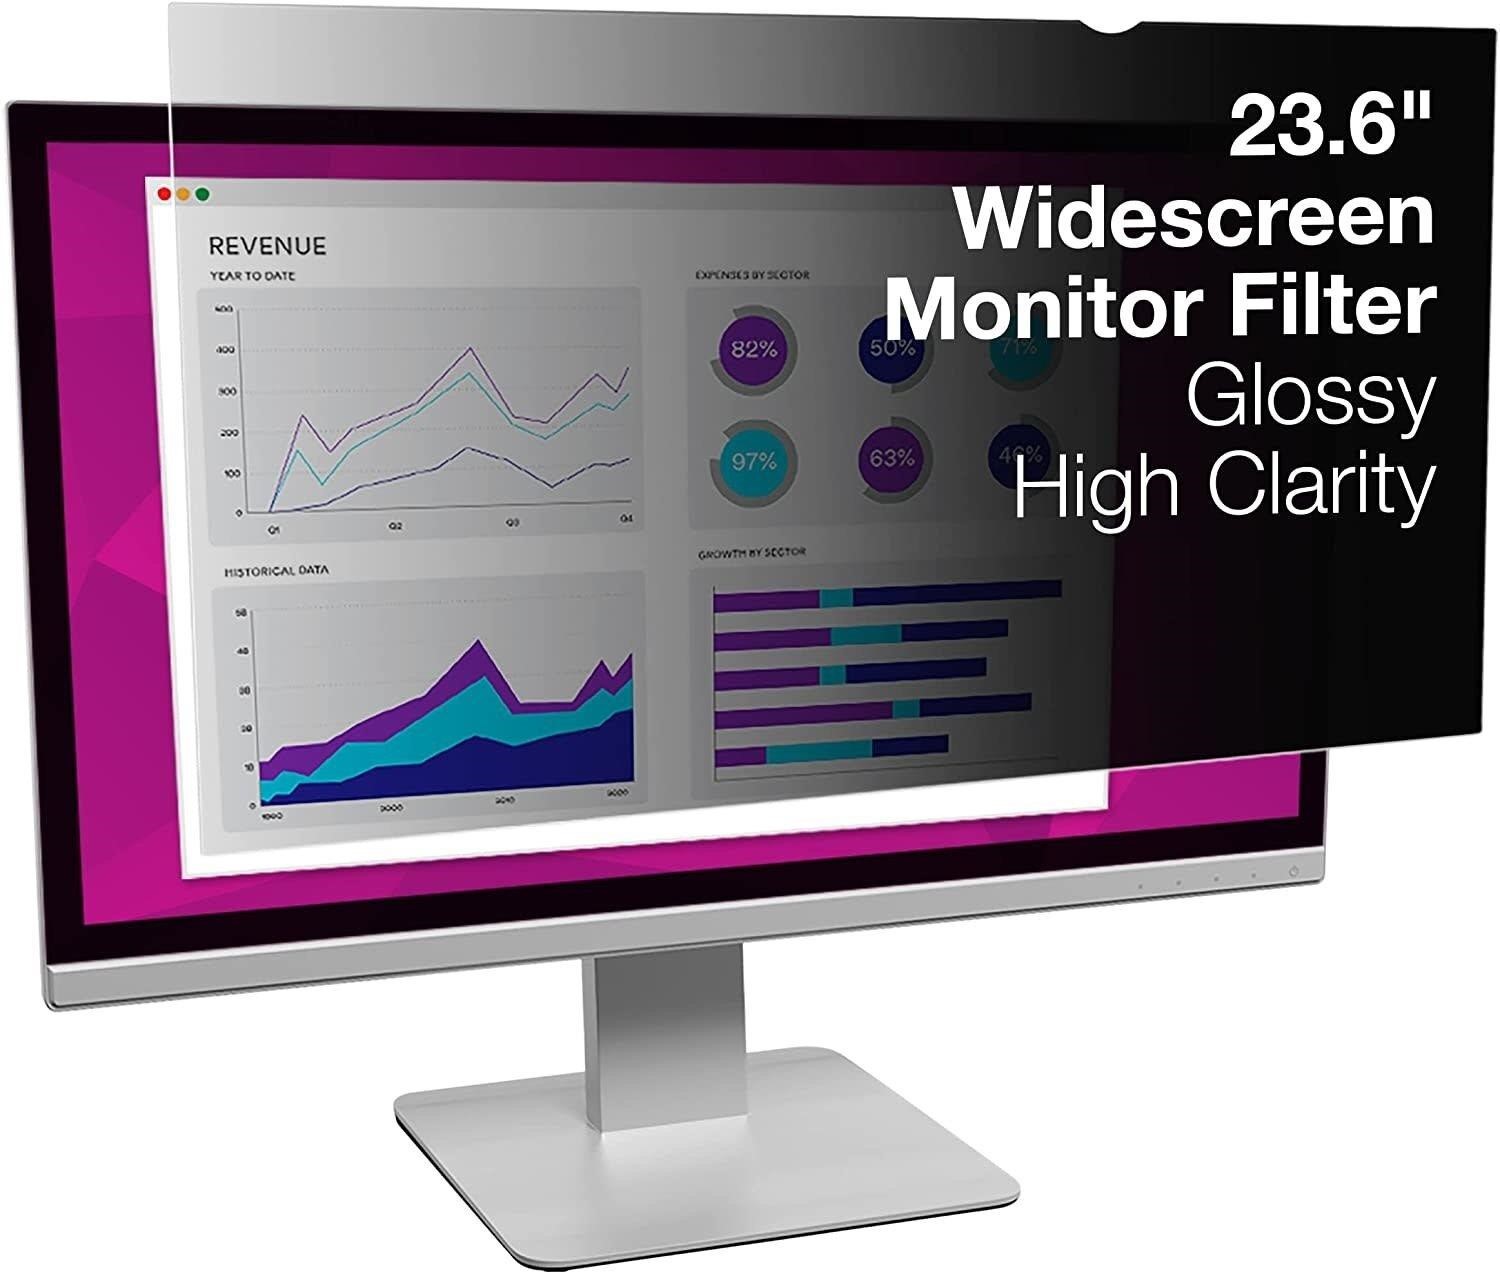 3M High Clarity Privacy Filter for 23.6" Monitor